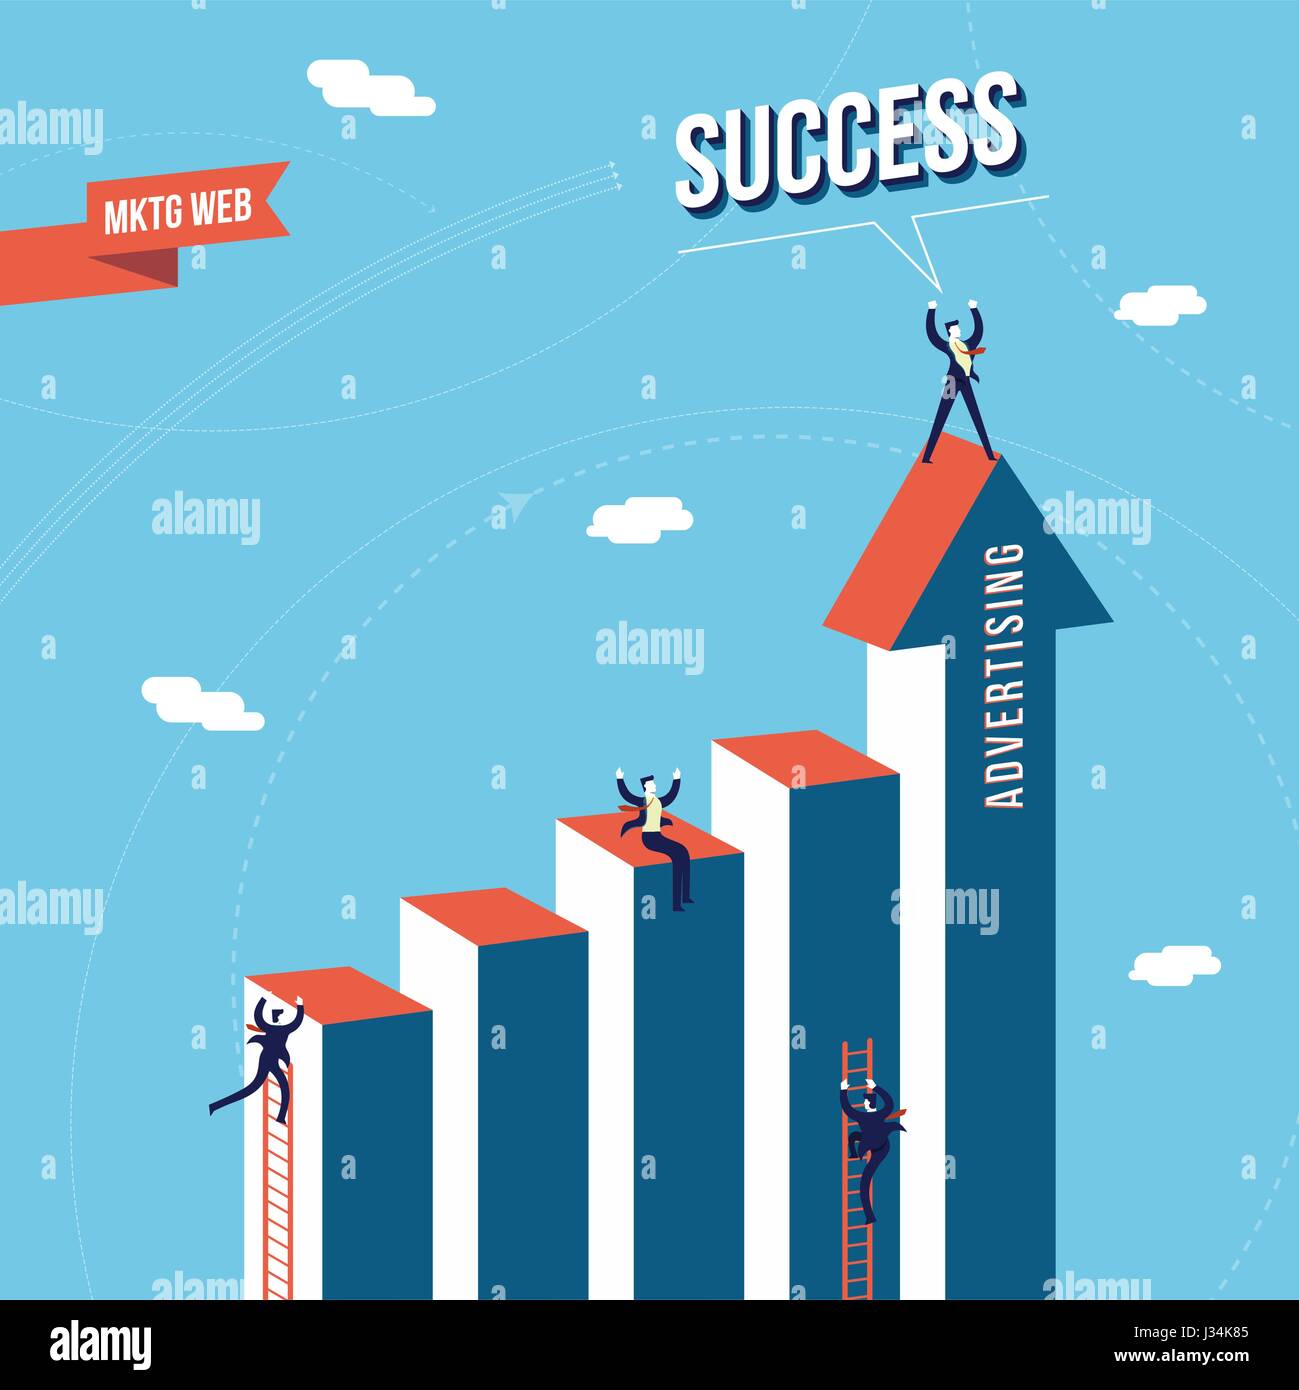 Business success graph with businessman team, web marketing and advertising concept illustration. EPS10 vector. Stock Vector